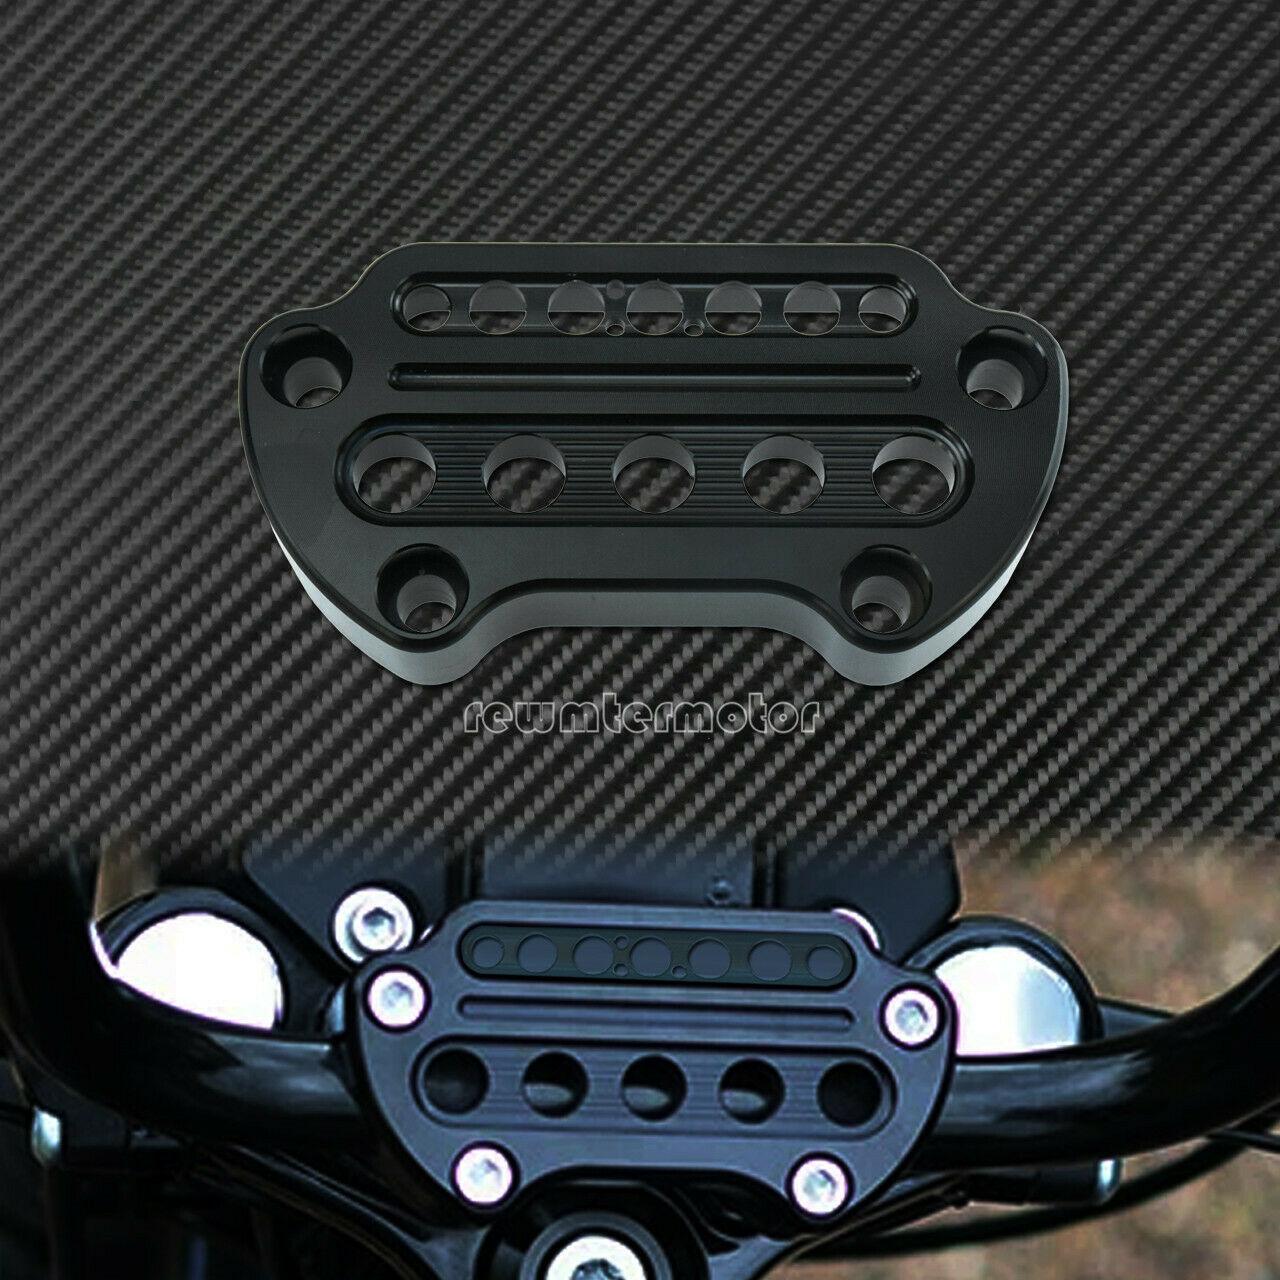 Front Indicator Handlebar Clamp Cover + Side Speedometer Bracket Fit For Harley - Moto Life Products